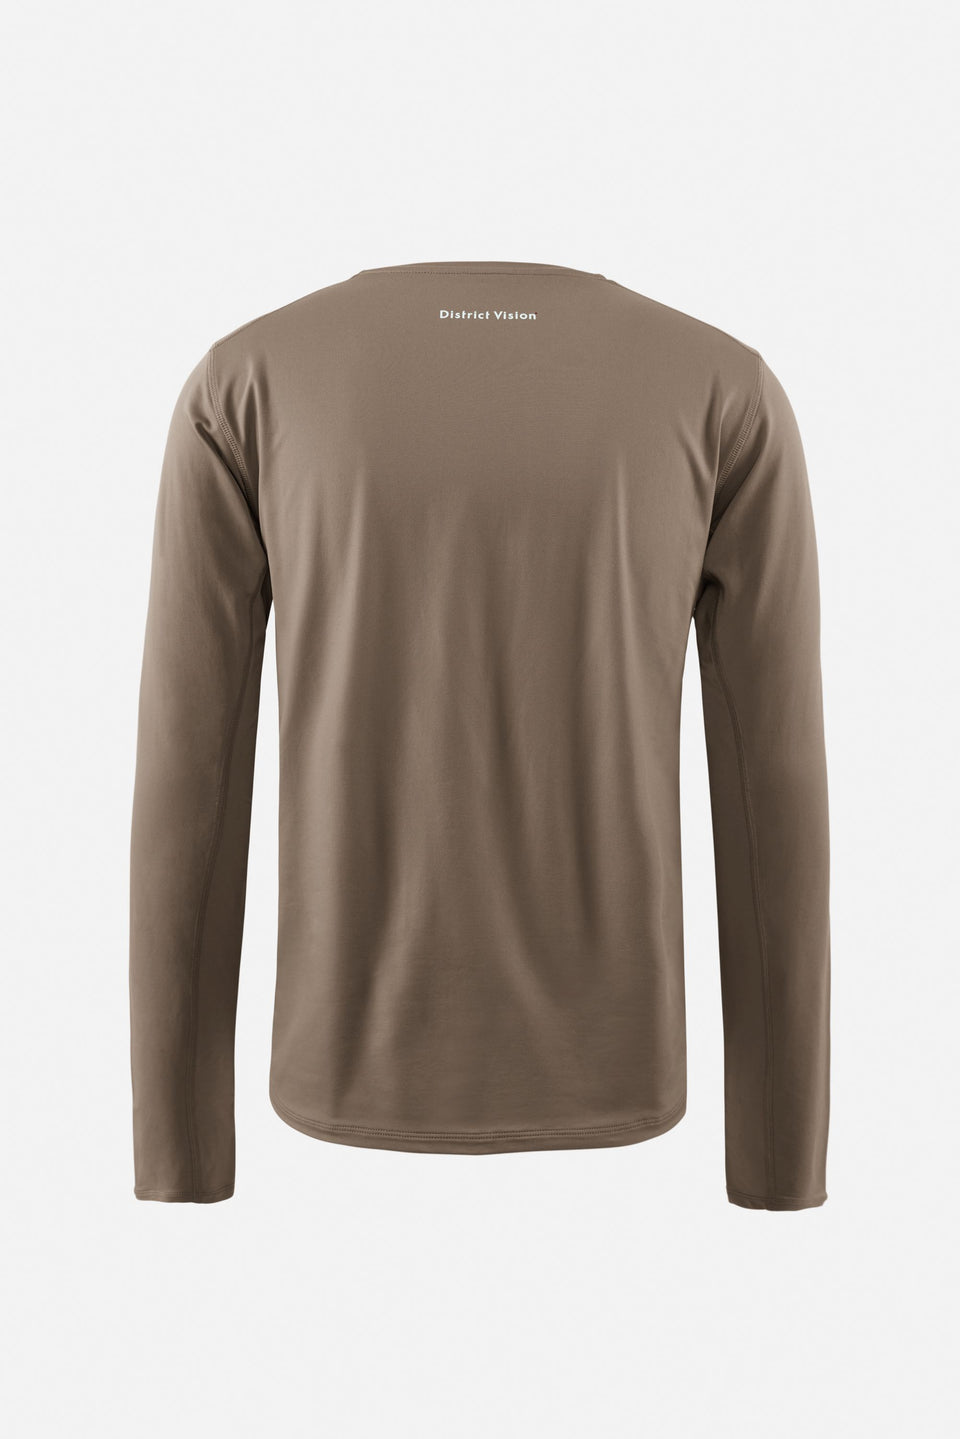 District Vision Los Angeles Trail Running FW23 Lightweight Long Sleeve T-Shirt Silt Calculus Victoria BC Canada